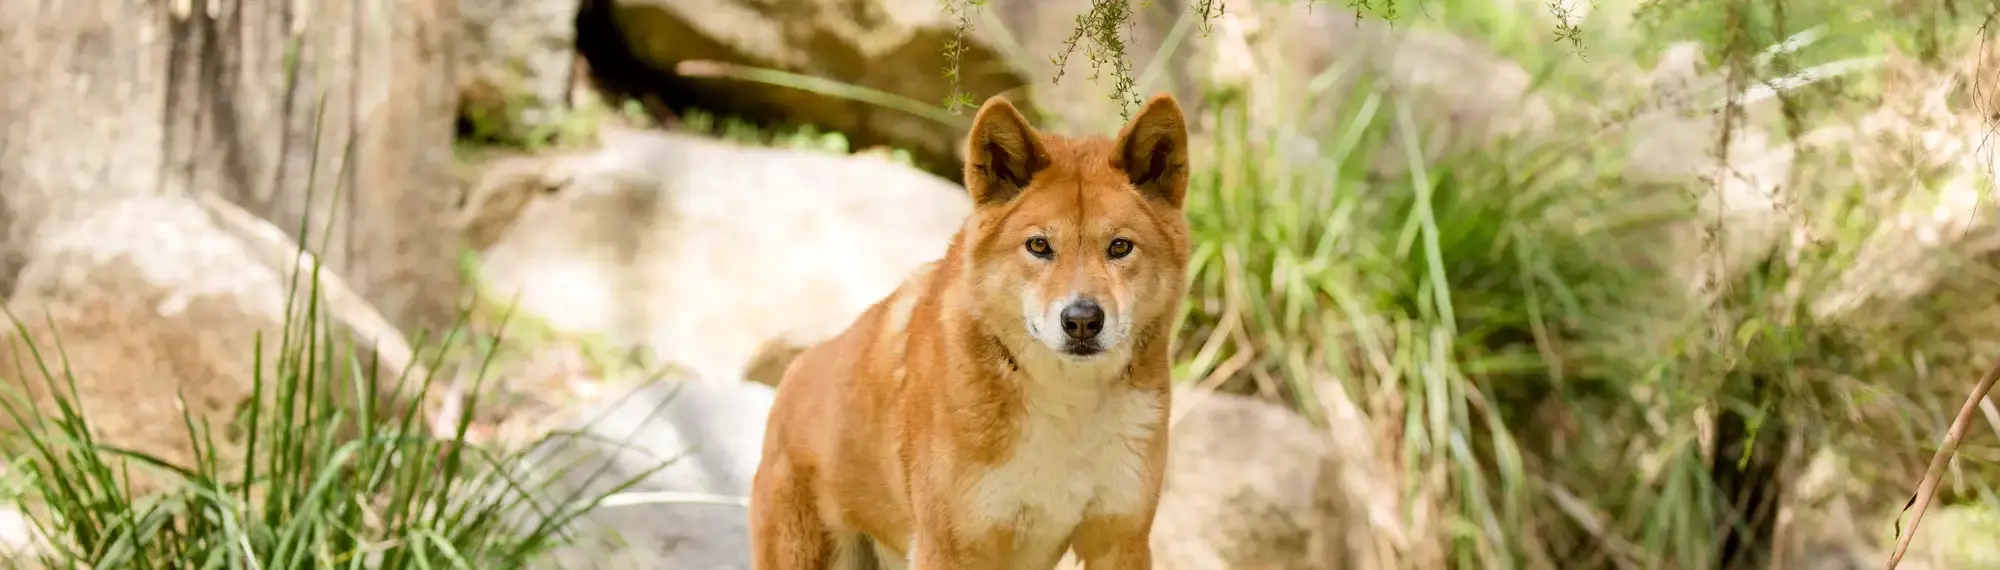 Dingo facing camera. Greenery and rock in background